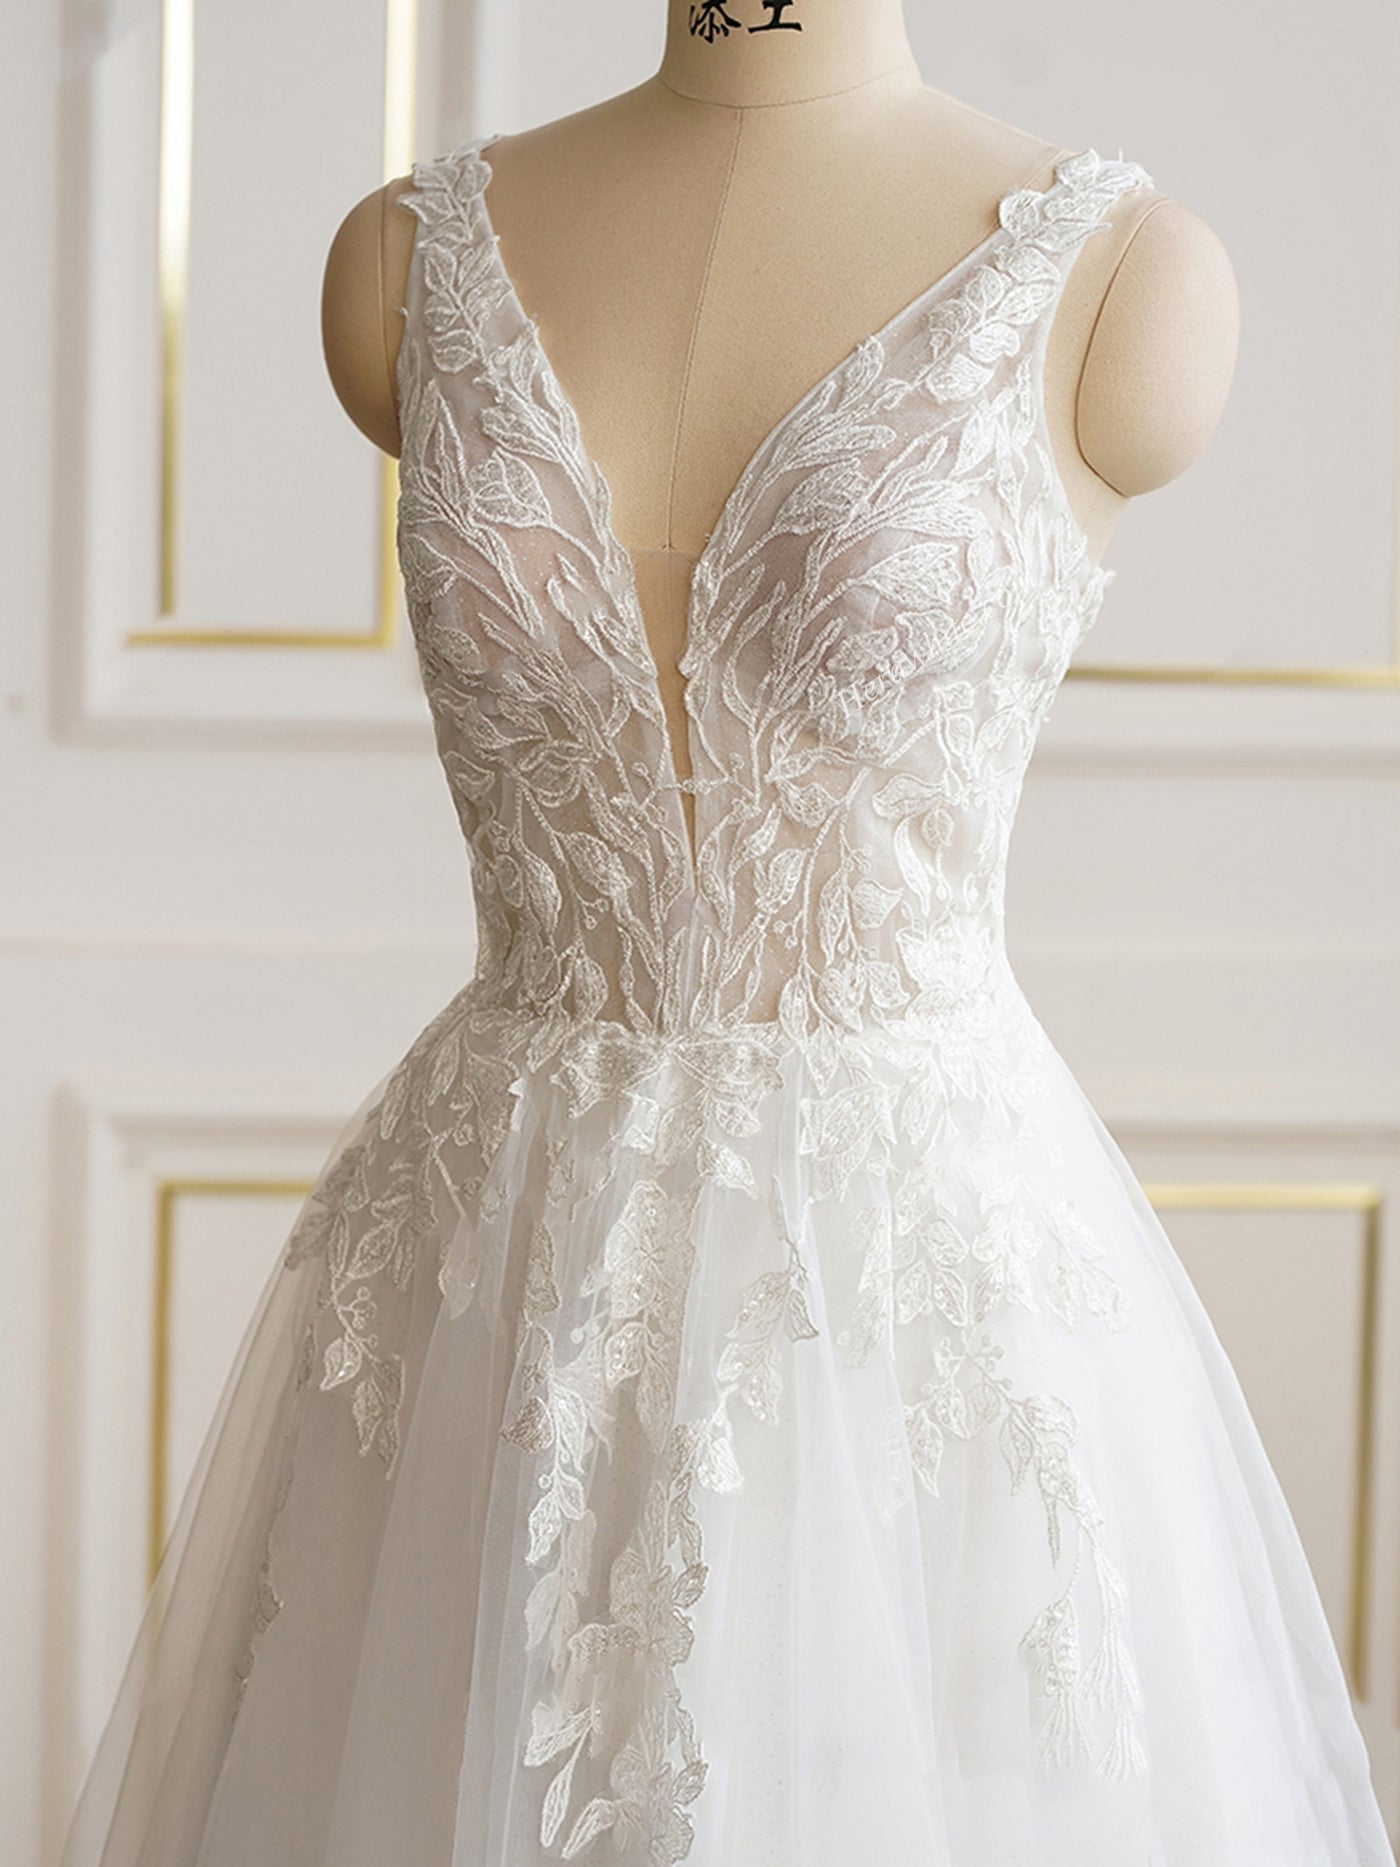 A Sexy Lace Plunging Neckline Sleeveless Bridal Gown on a Bergamot Bridal shop mannequin.